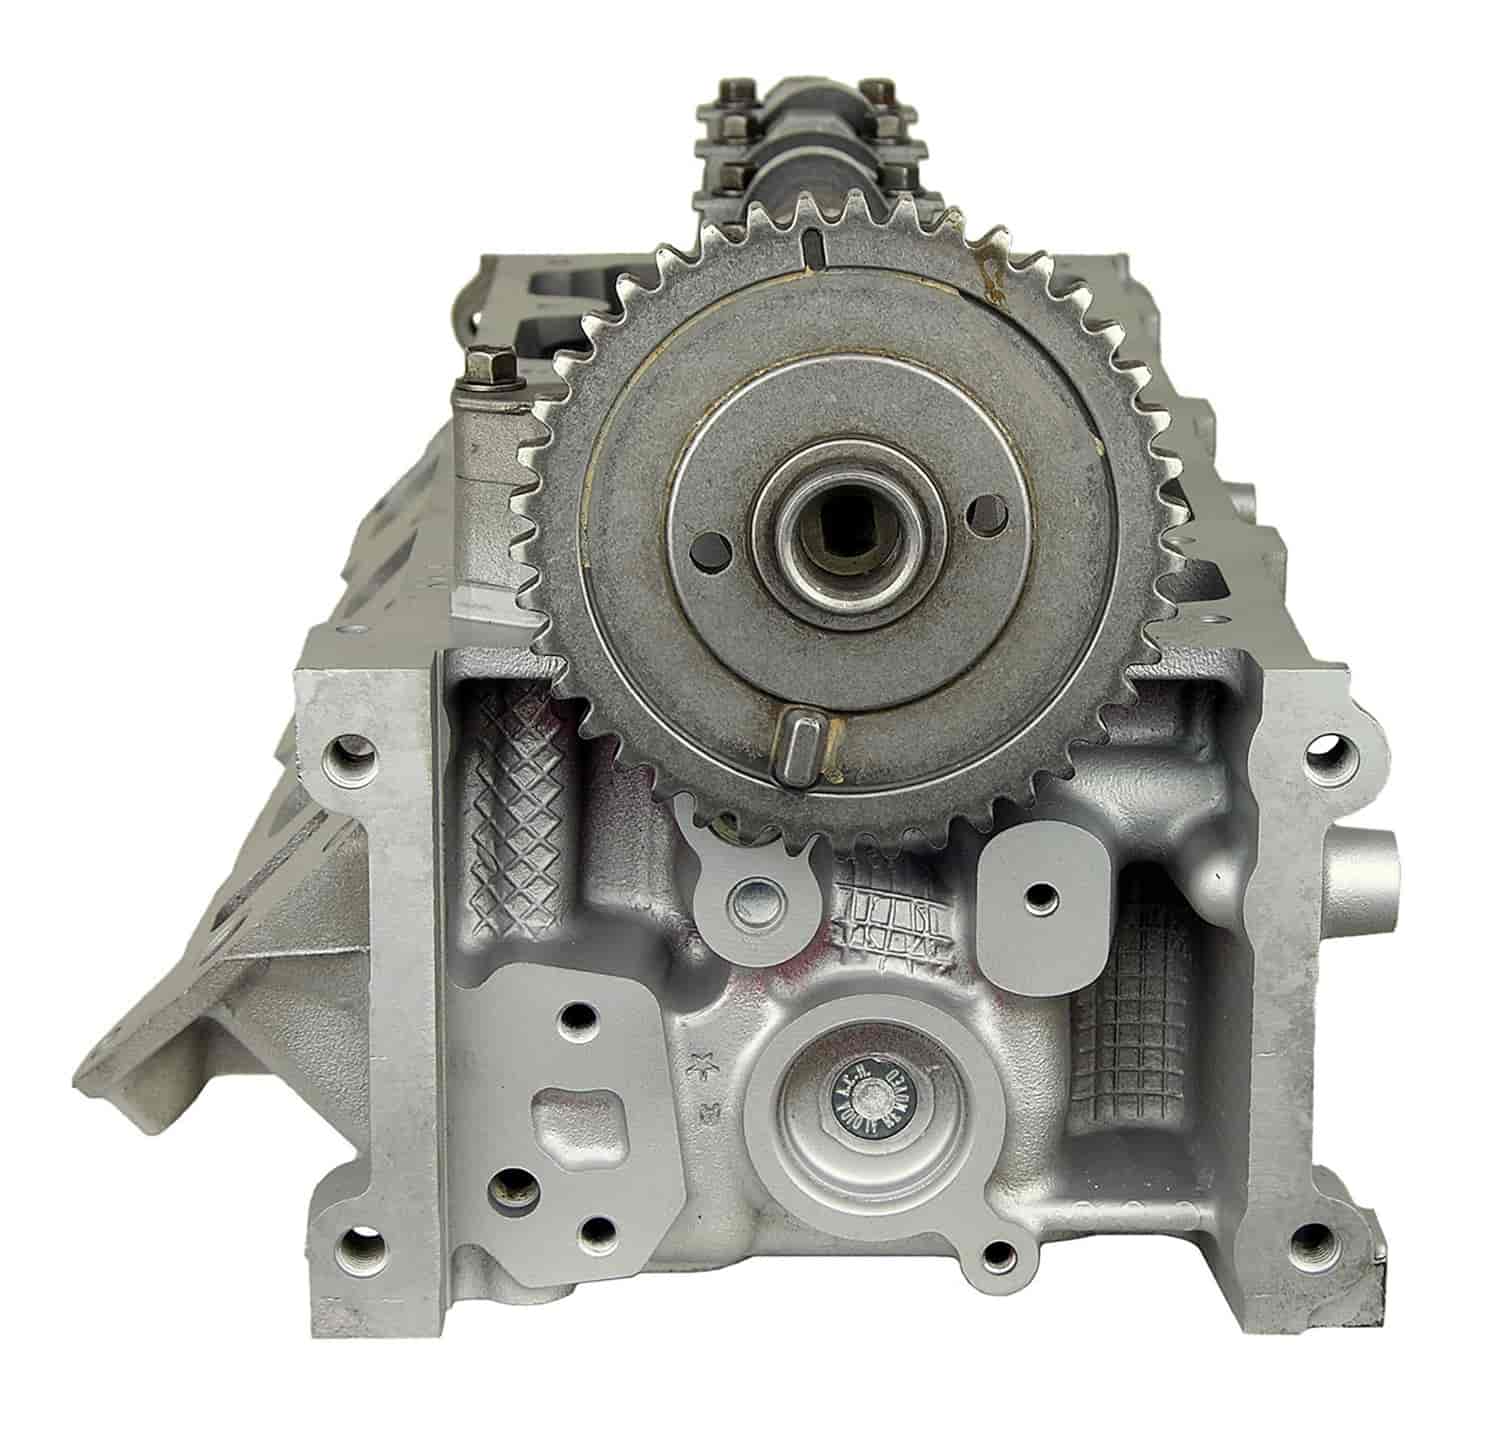 Remanufactured Cylinder Head for 2003-2004 Ford Expedition with 5.4L V8